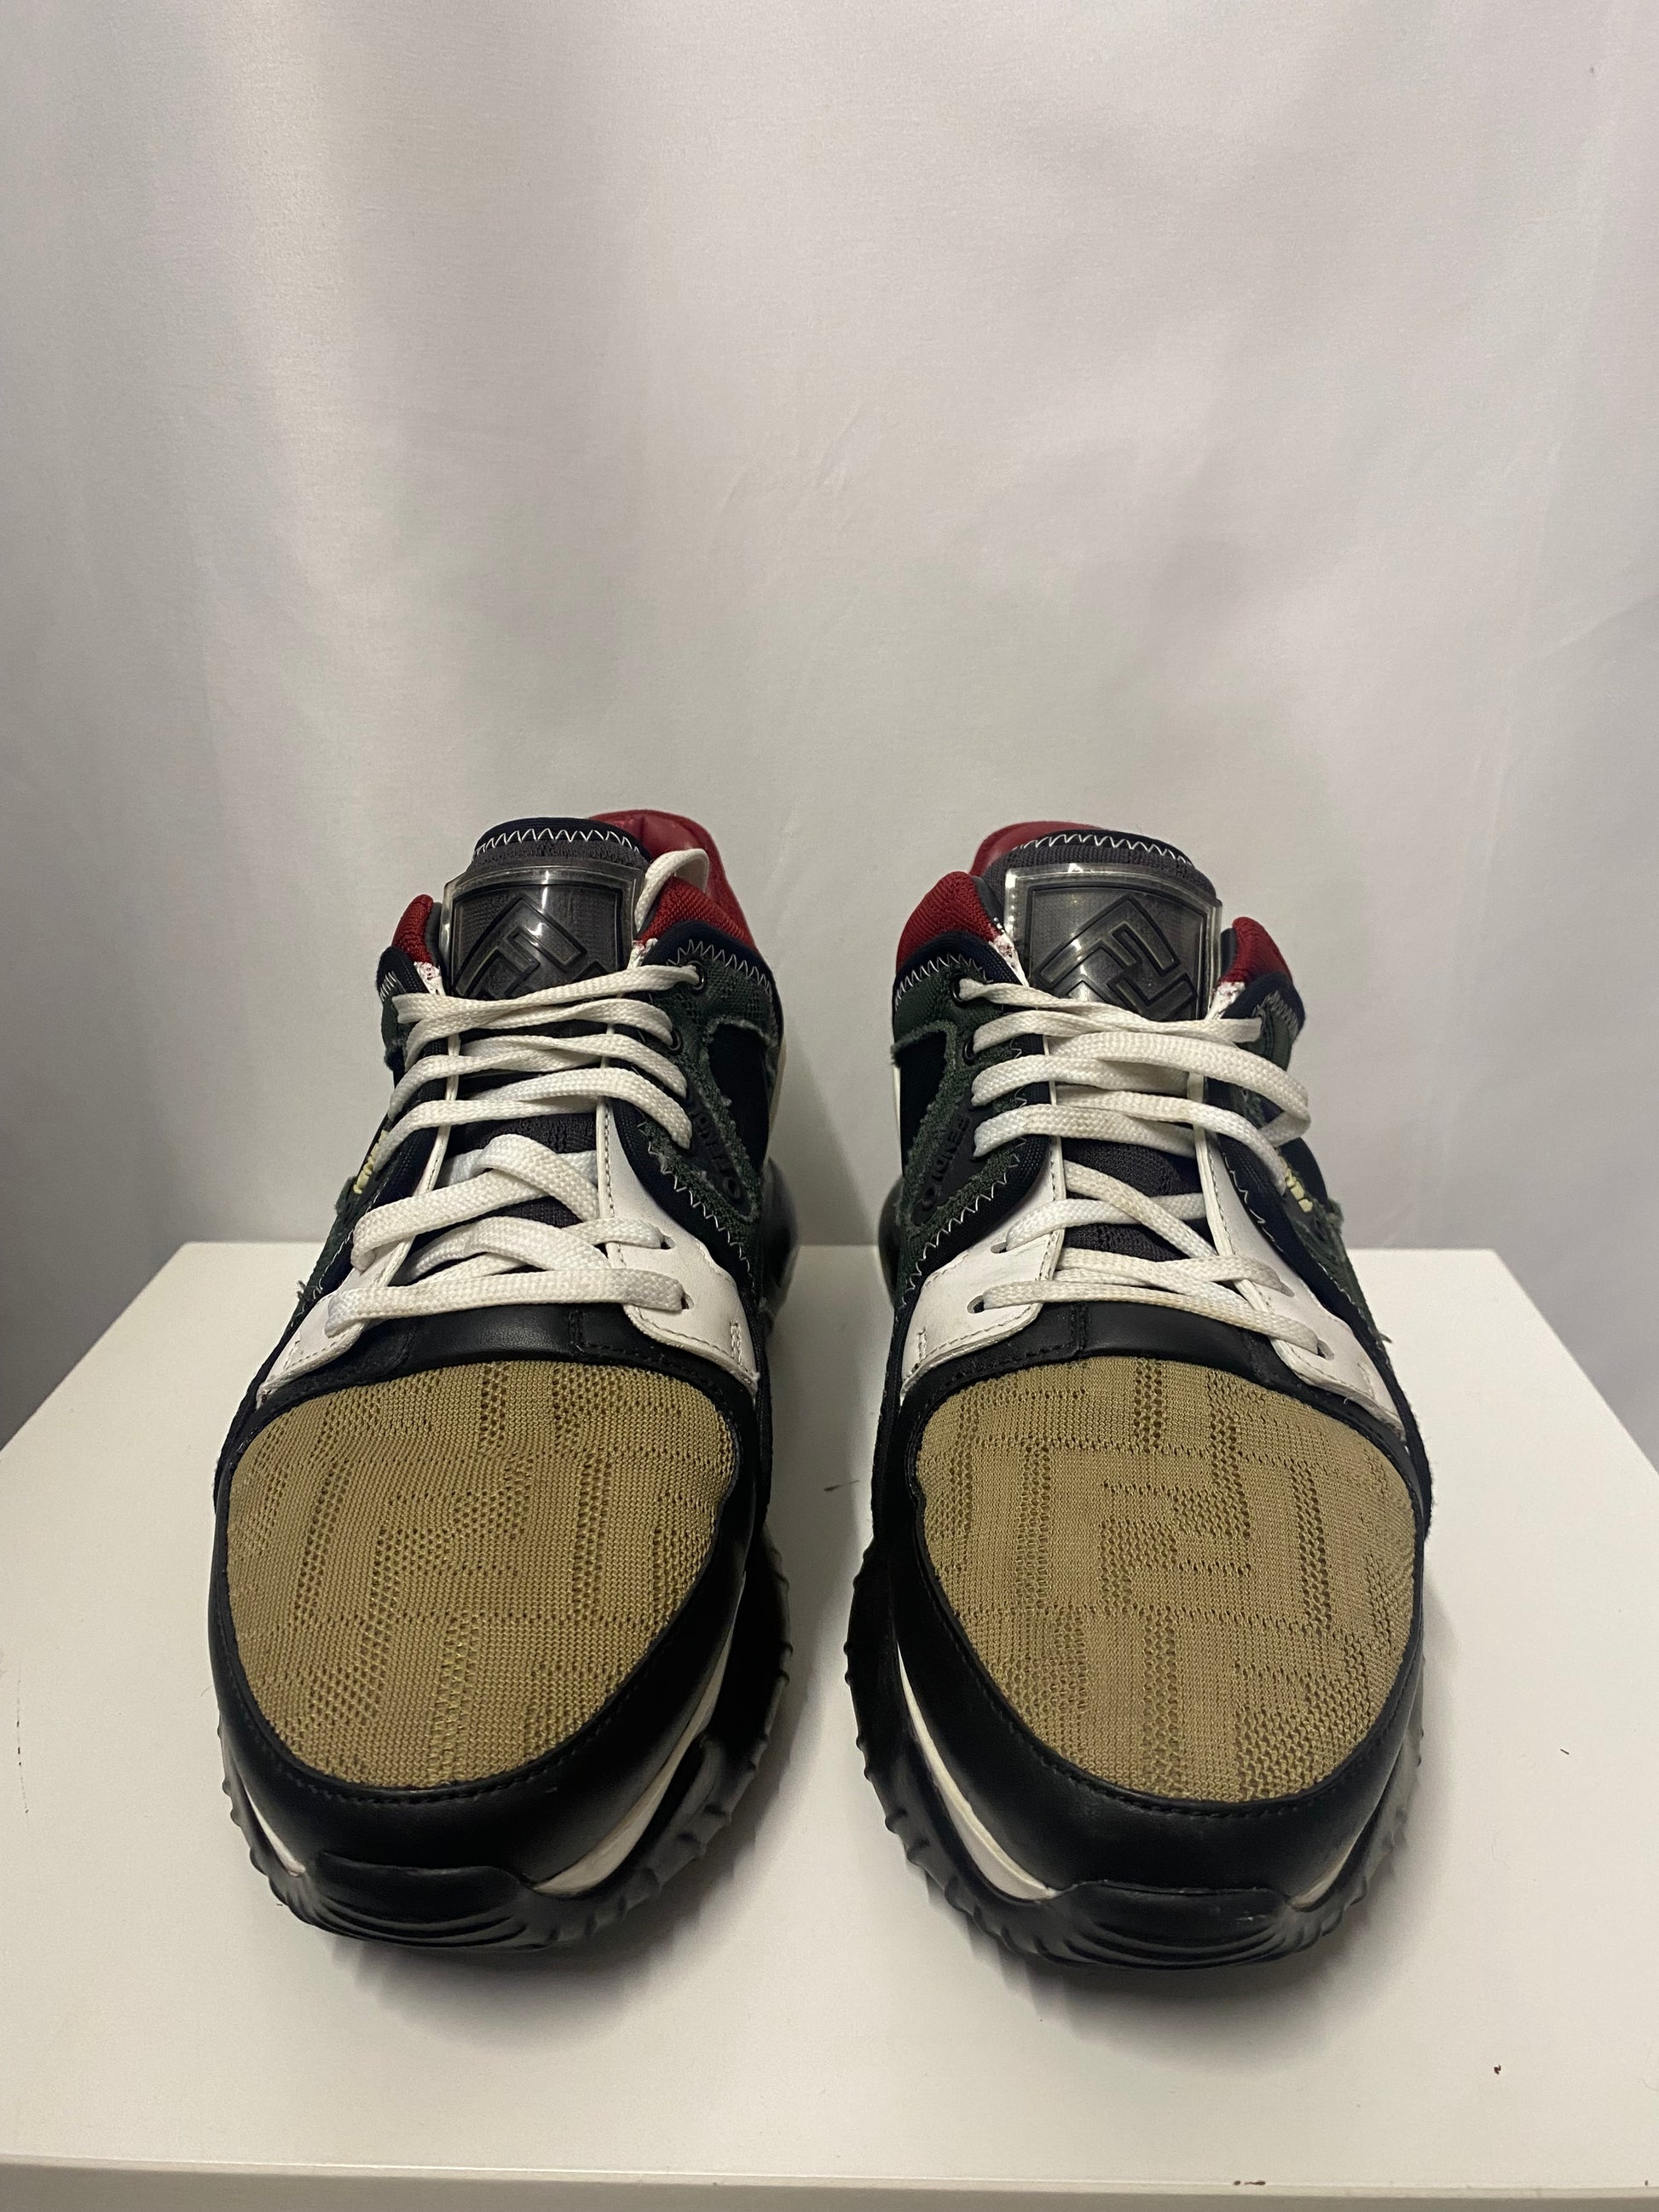 LV Trainers - Beige